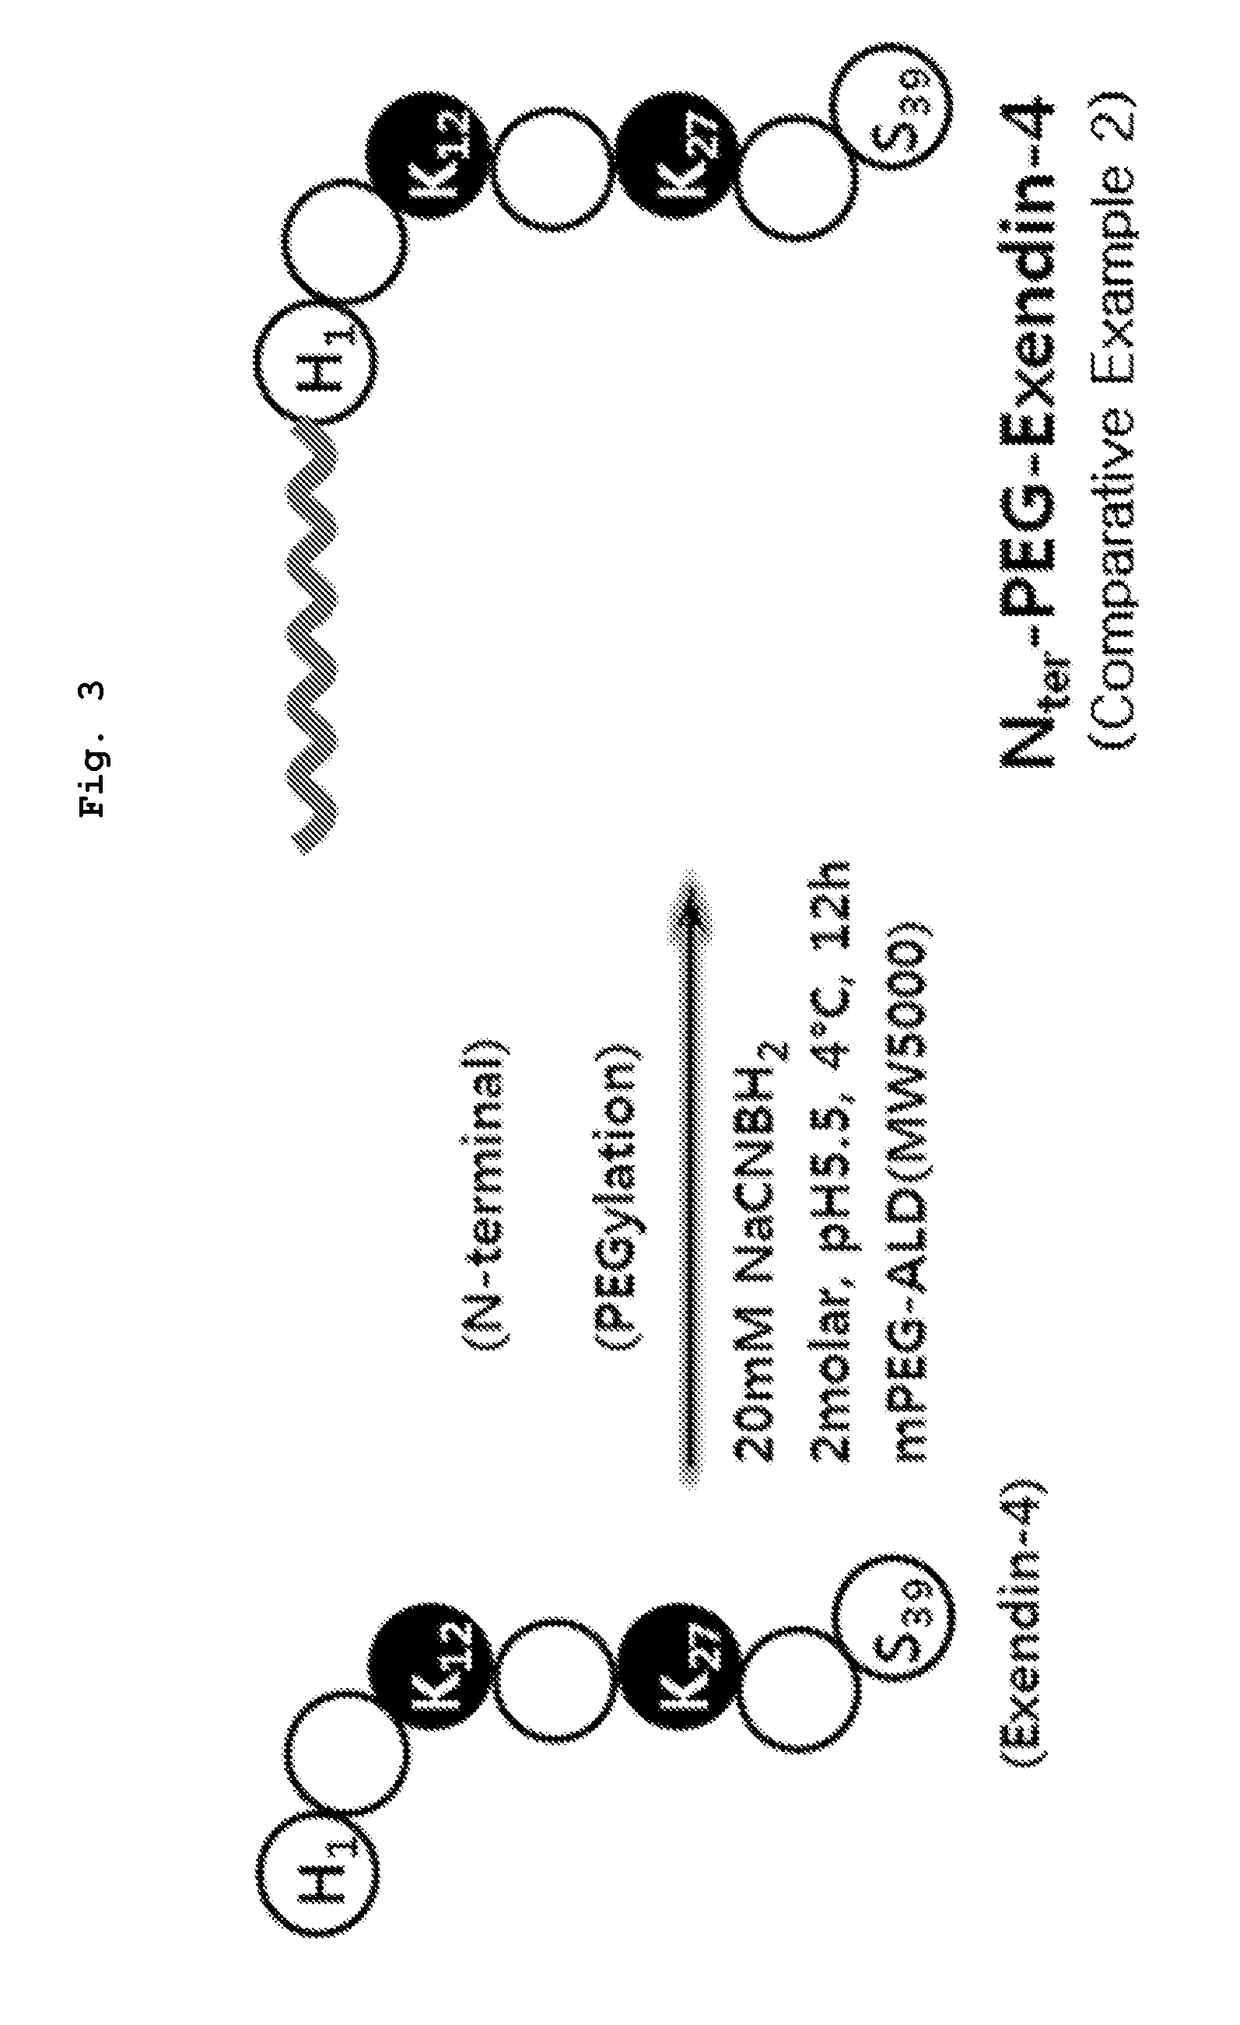 Exendin-4 analogue pegylated with polyethylene glycol or derivative thereof, preparation method thereof, and pharmaceutical composition for preventing or treating diabetes, containing same as active ingredient